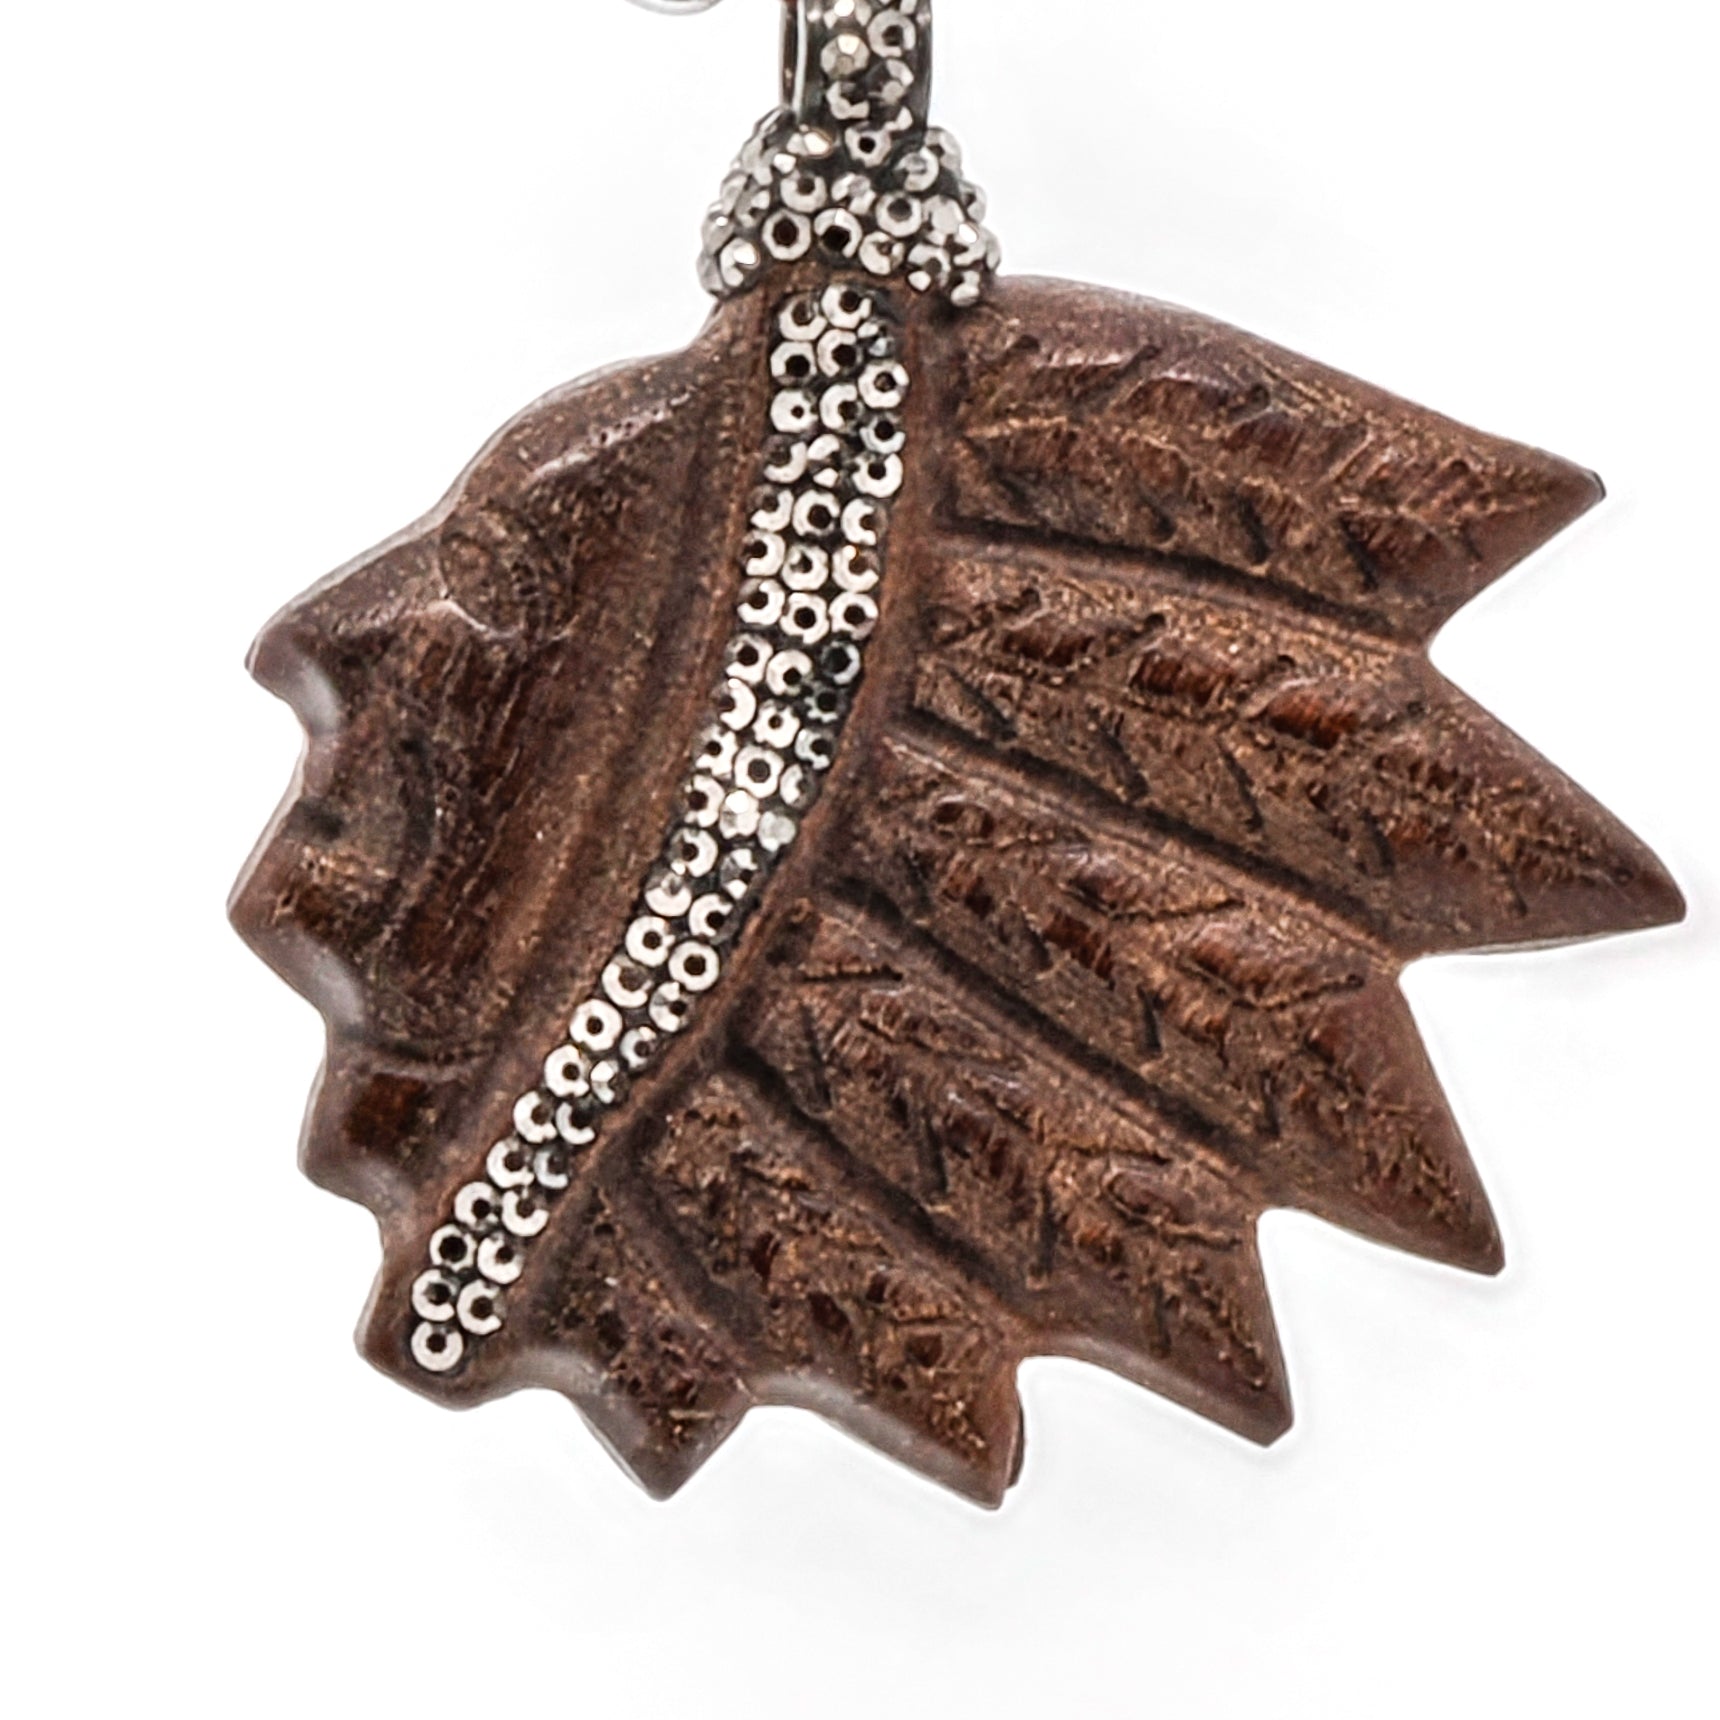 The engraved wood Indian chief pendant adds a touch of cultural significance to the necklace, with its intricate detailing and symbolic meaning.